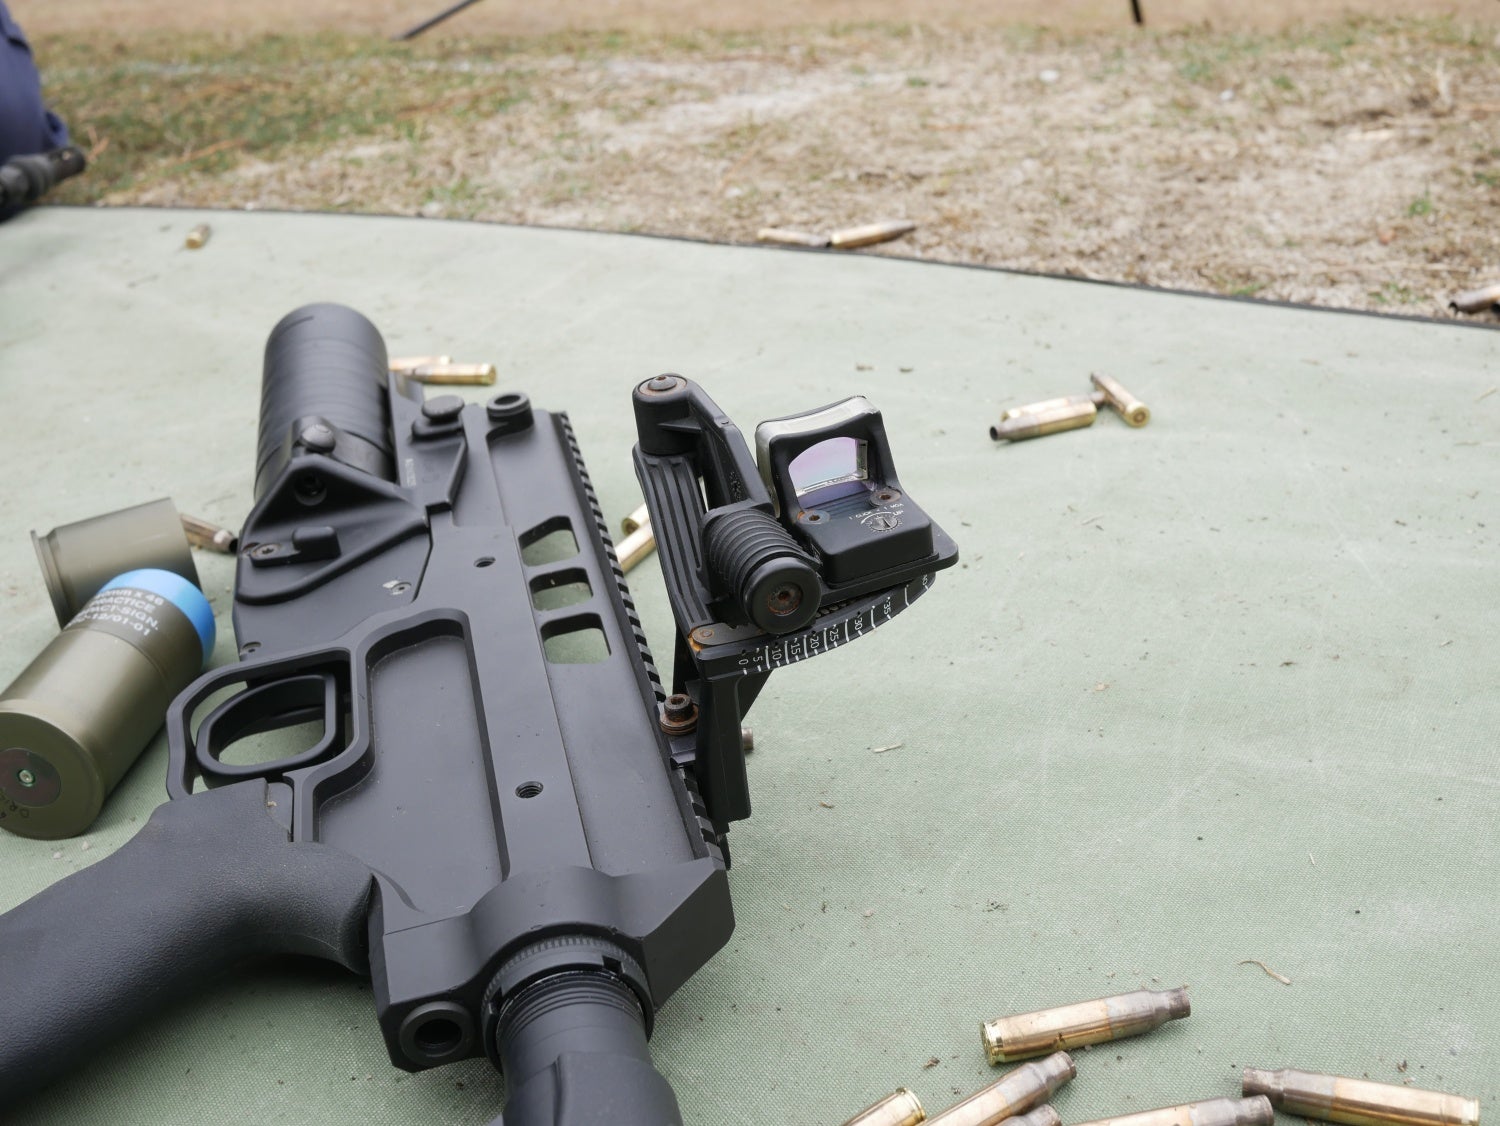 Hands on with the SL40 UBGL/Standalone Grenade Launcher from Lithgow Arms.